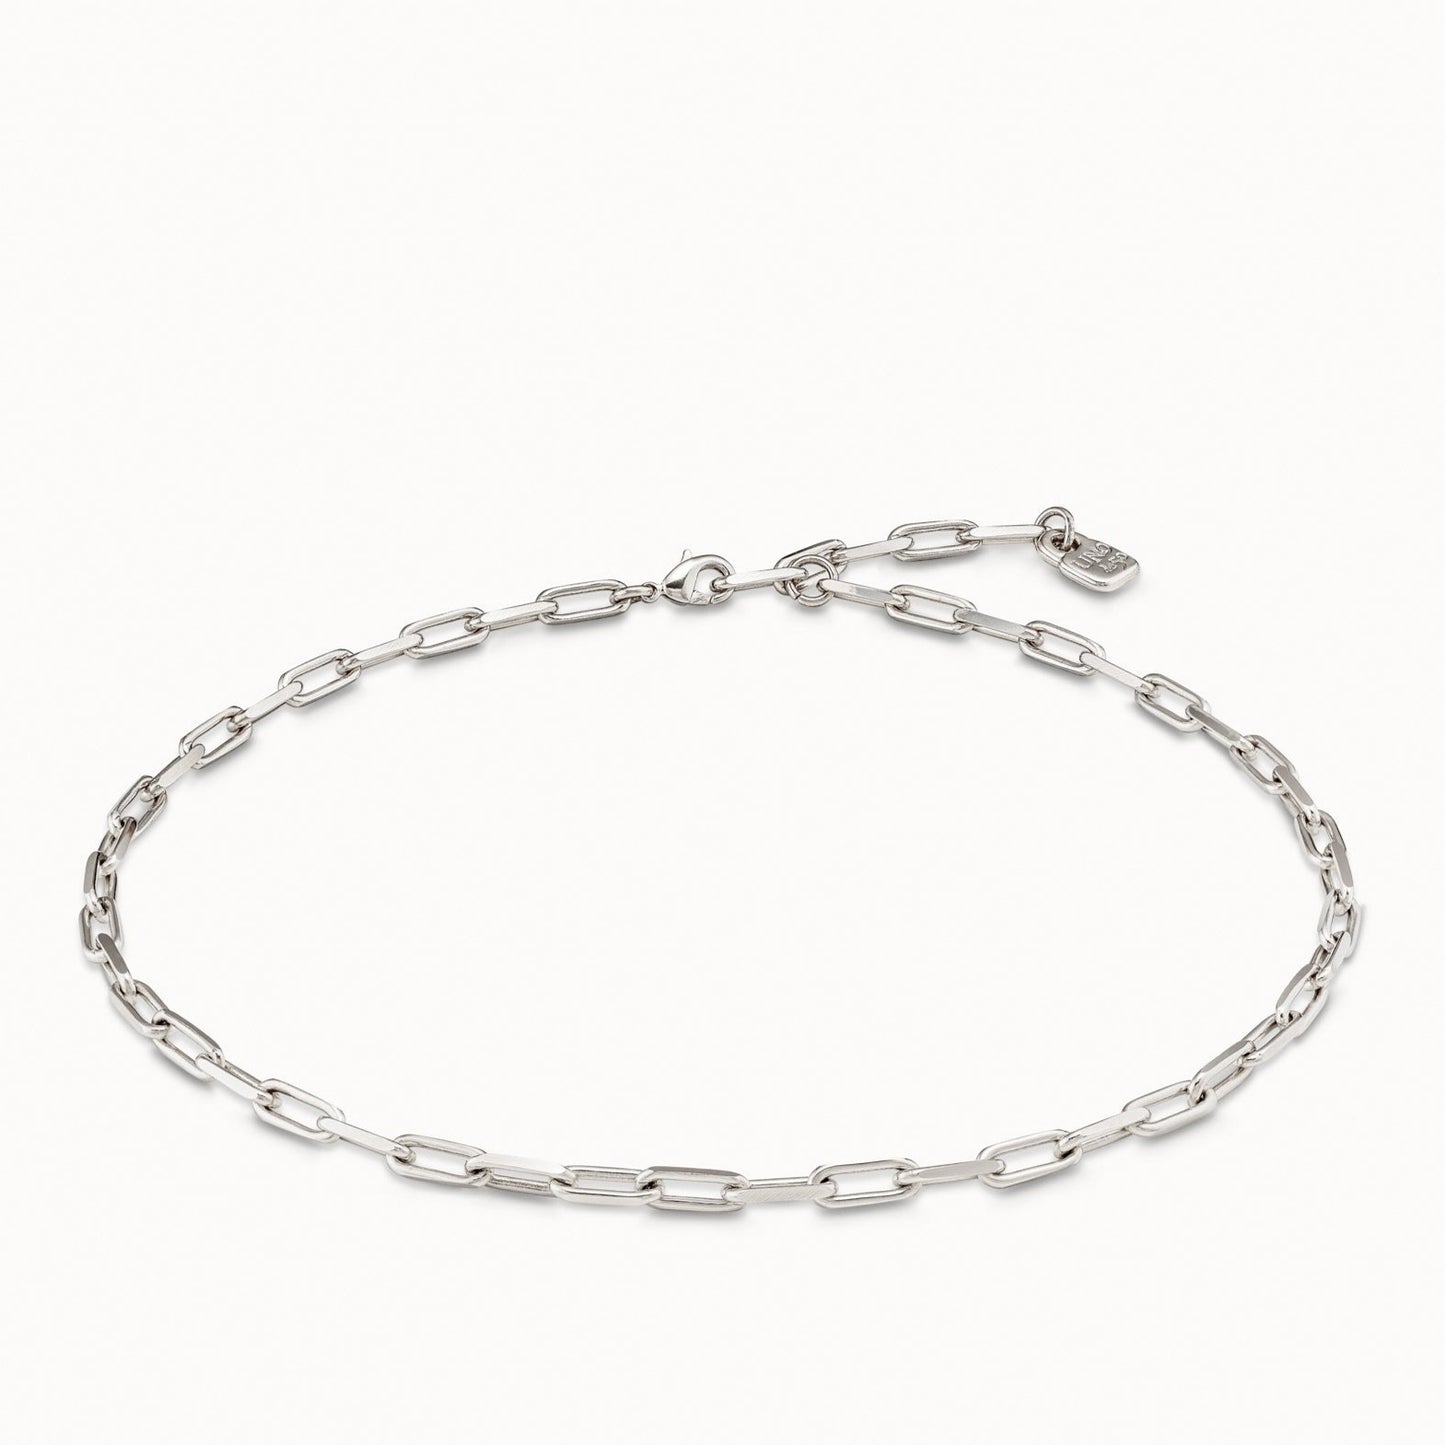 Short Silver Chain Necklace